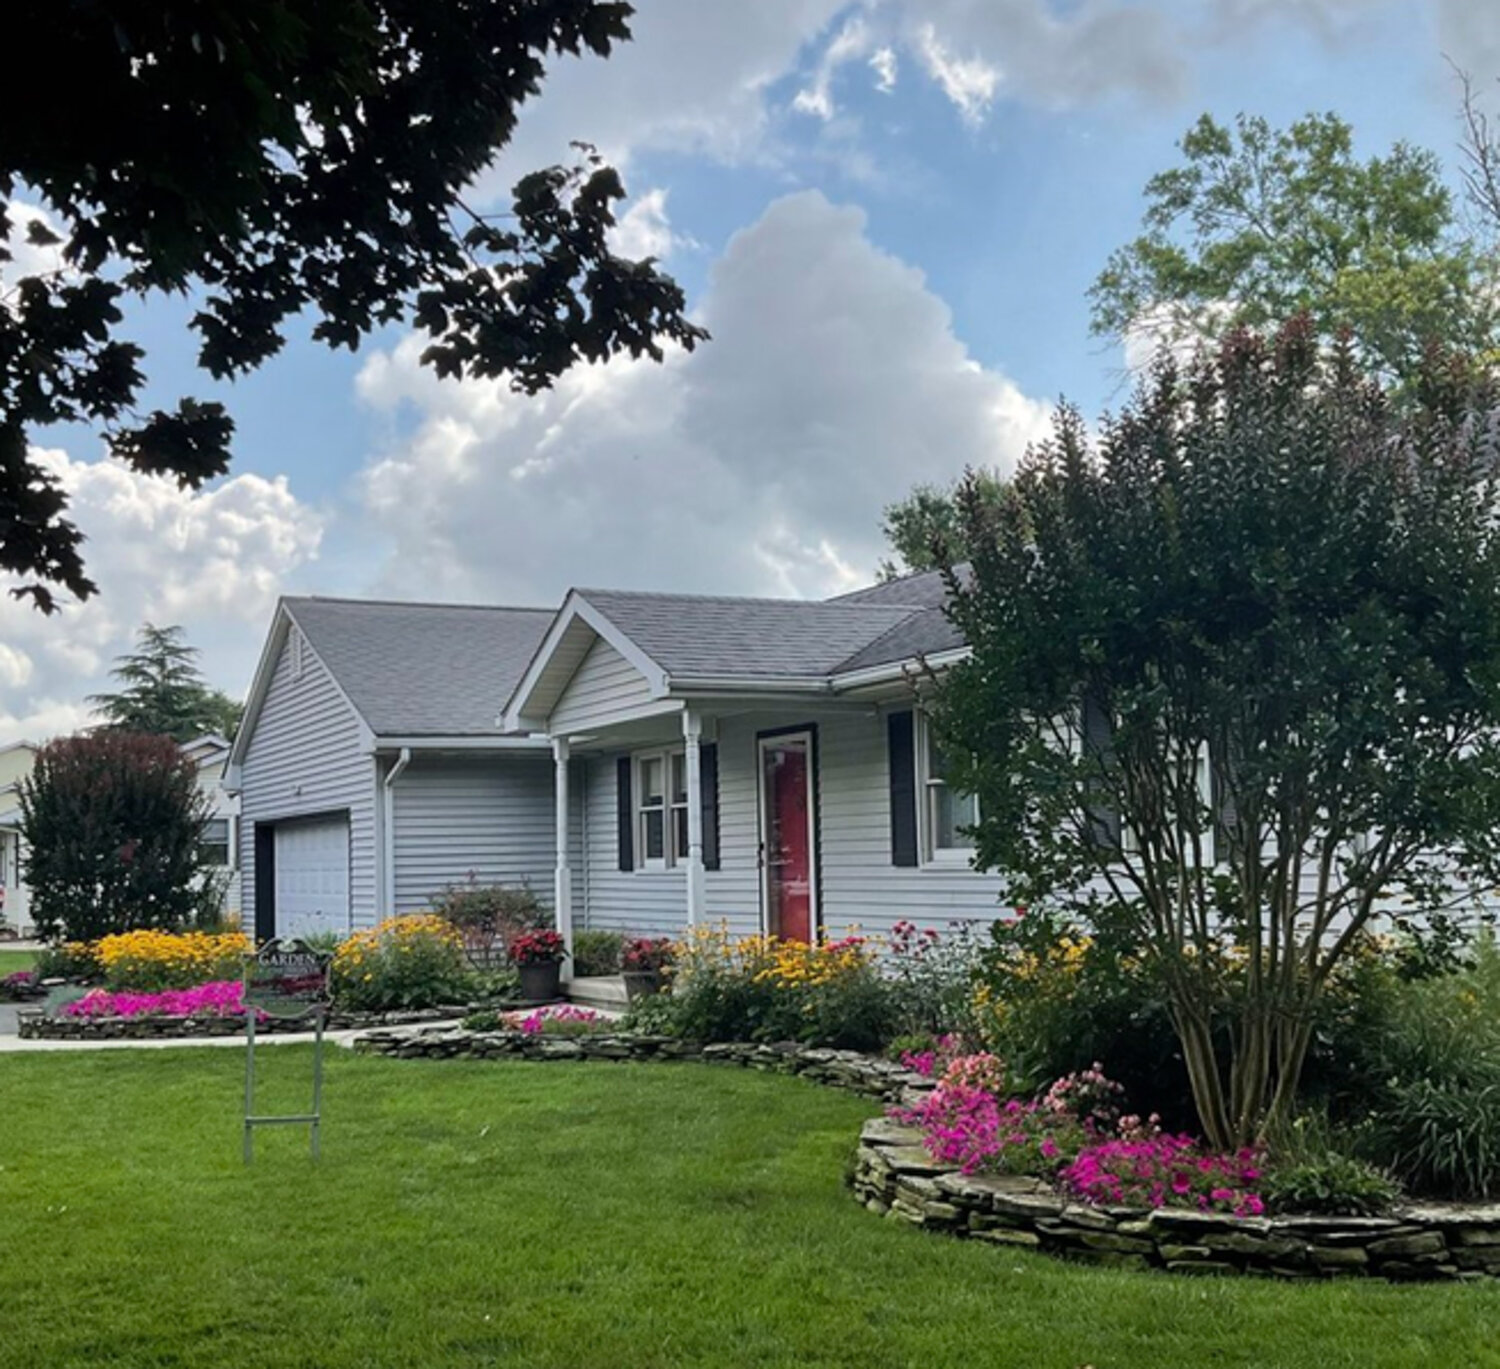 Steve and Toni Zeveney’s garden at 58 Valley Forge Drive in Shawnee Acres, is full of “perfectly placed” flowers of a variety of colors, the Milford Garden Club wrote of their pick for July garden of the month.